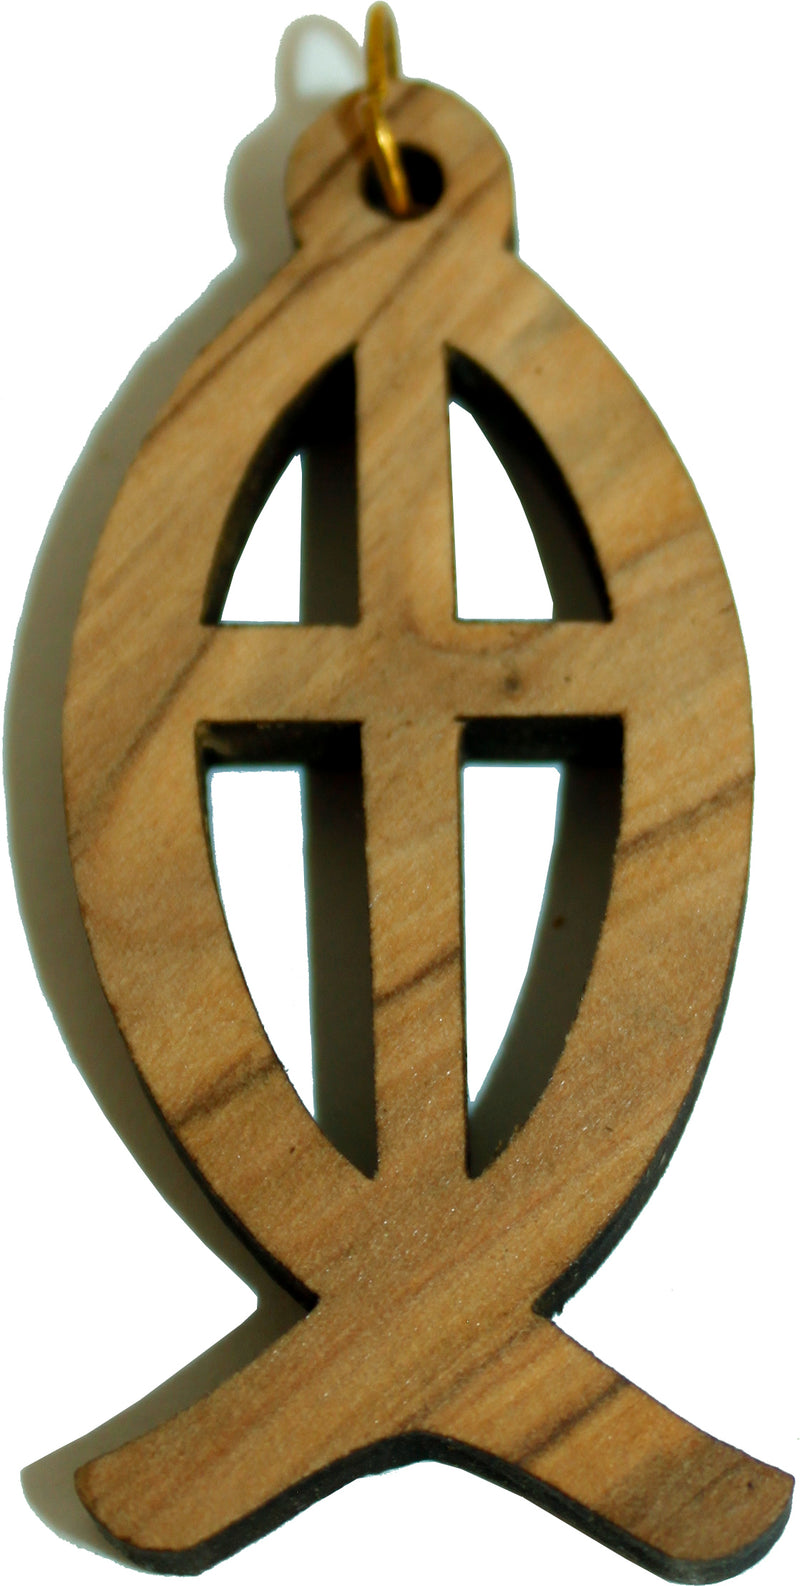 Fish and Cross Olive wood Laser pendant (6cm or 2.36" long )